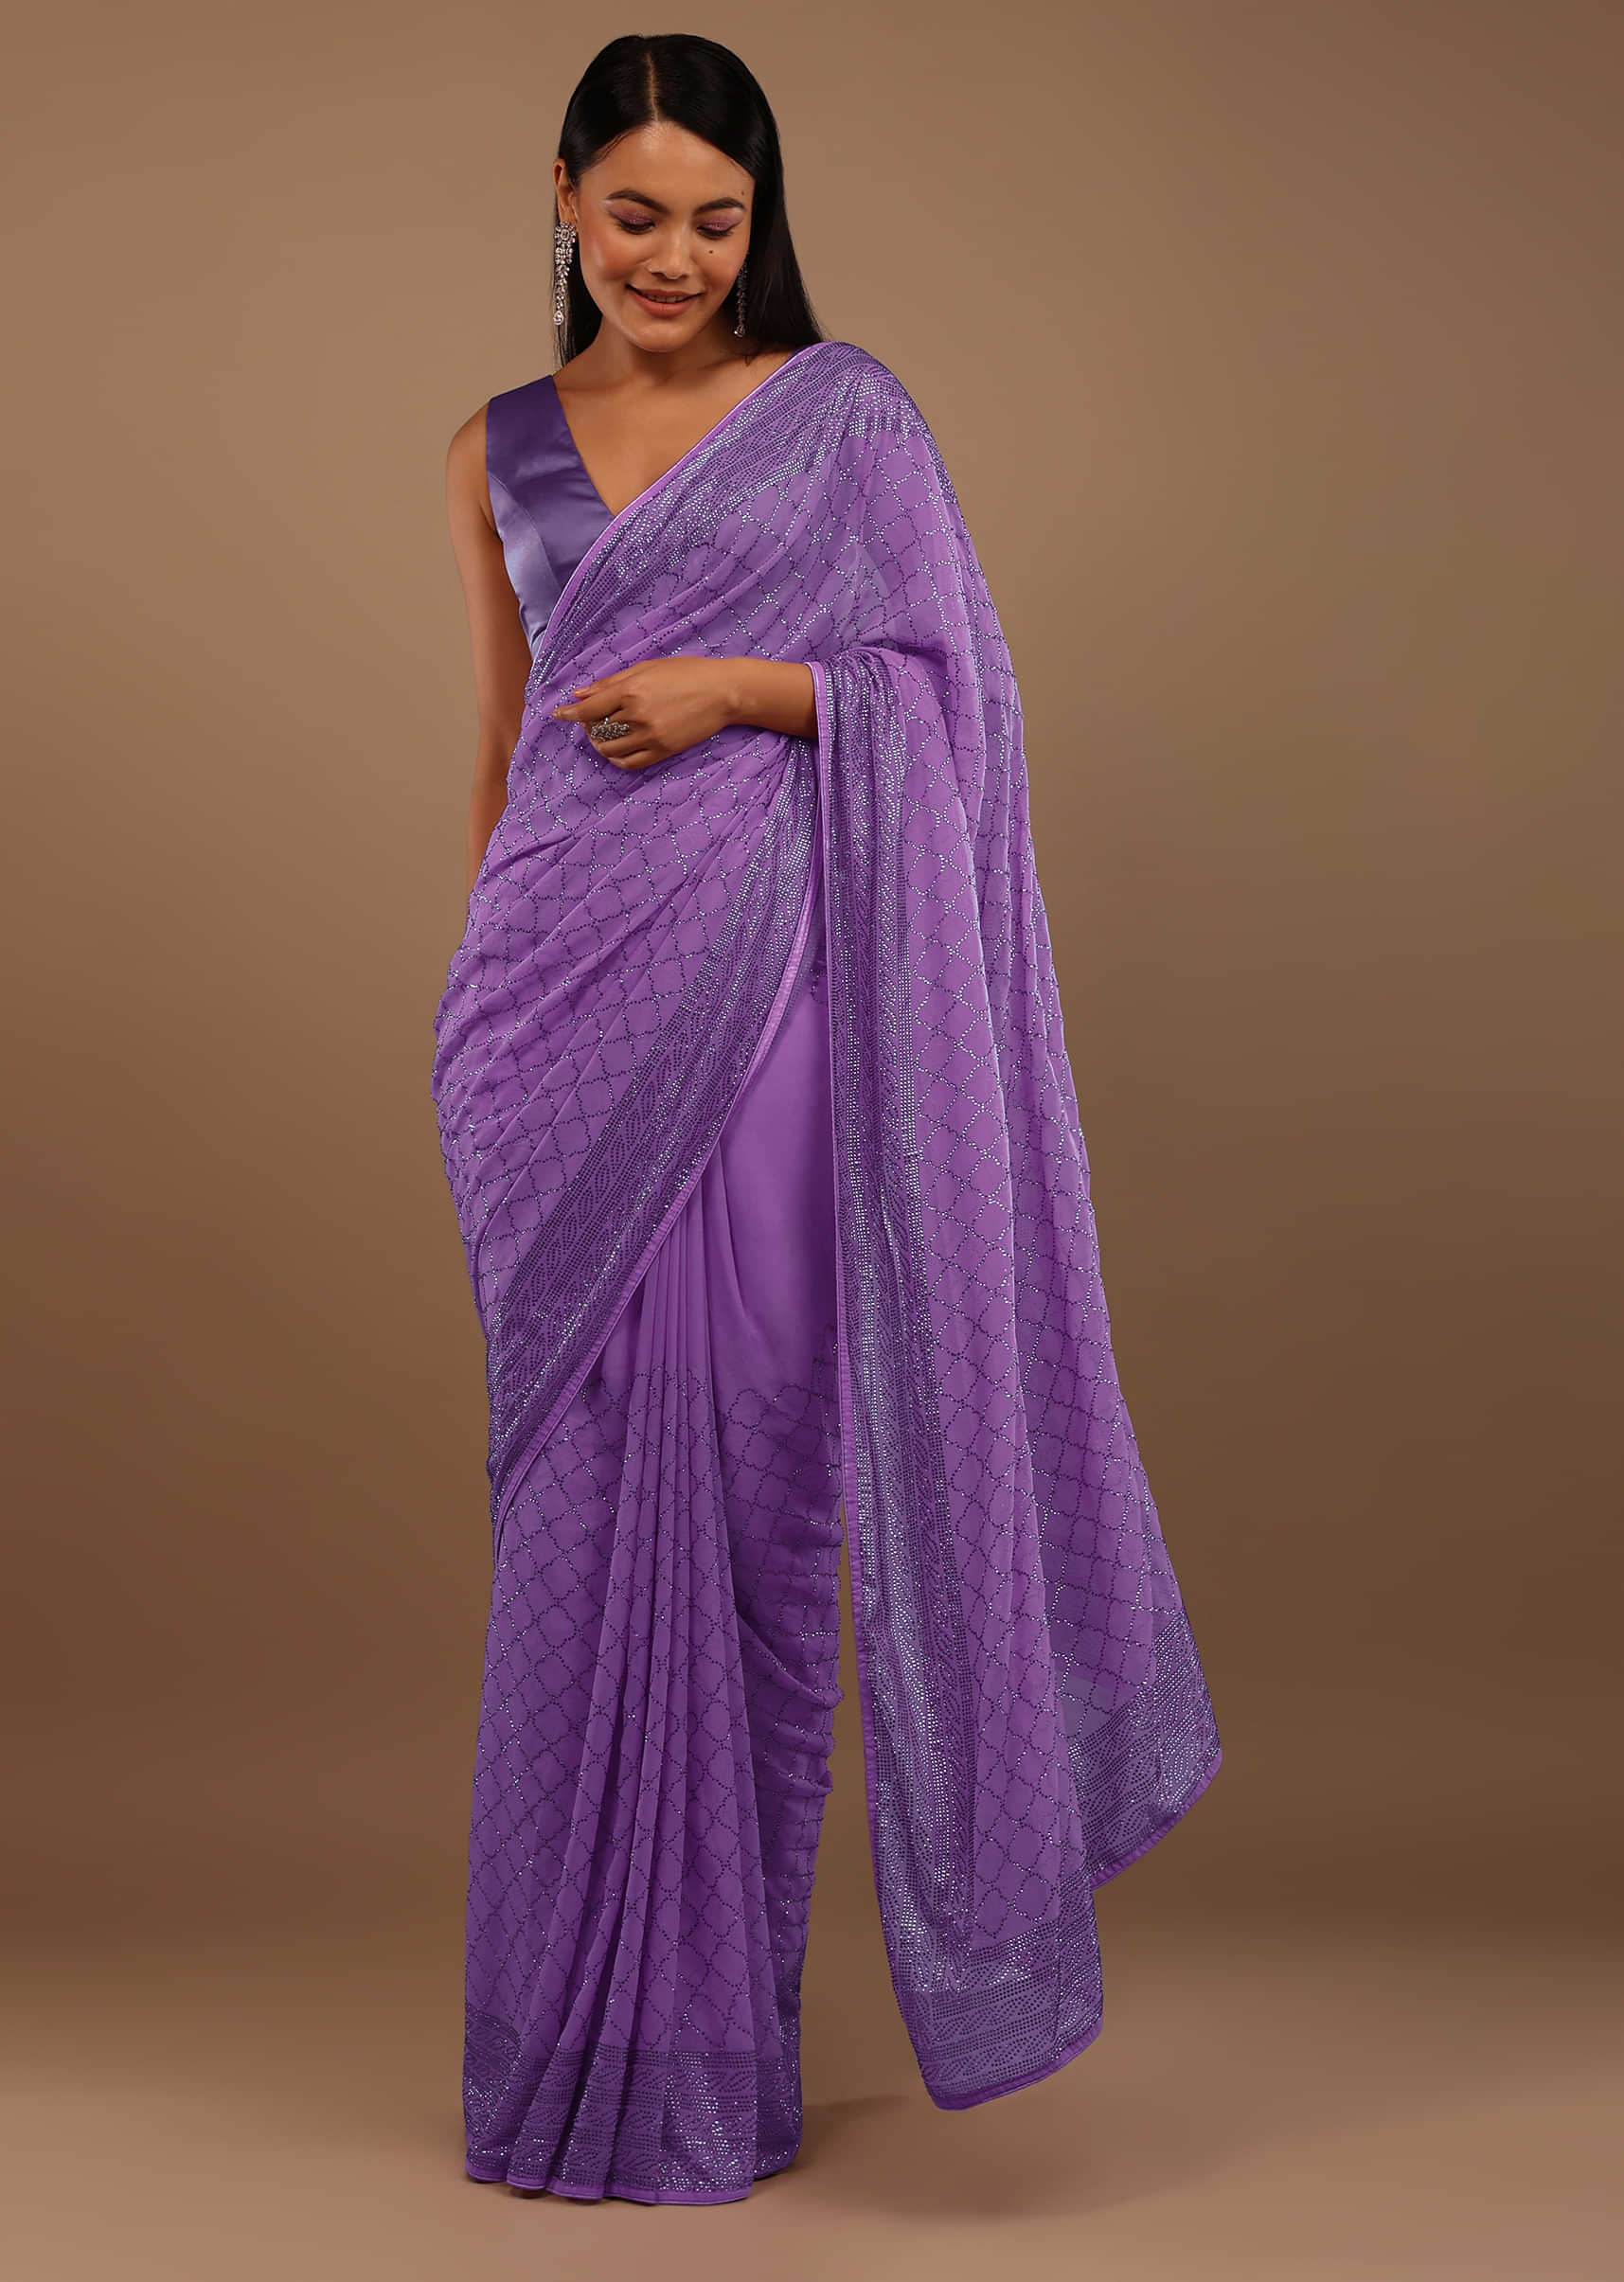 Light Purple Georgette Saree With Swarovski Stonework On The Borders And A Stonework Added Unstitched Blouse